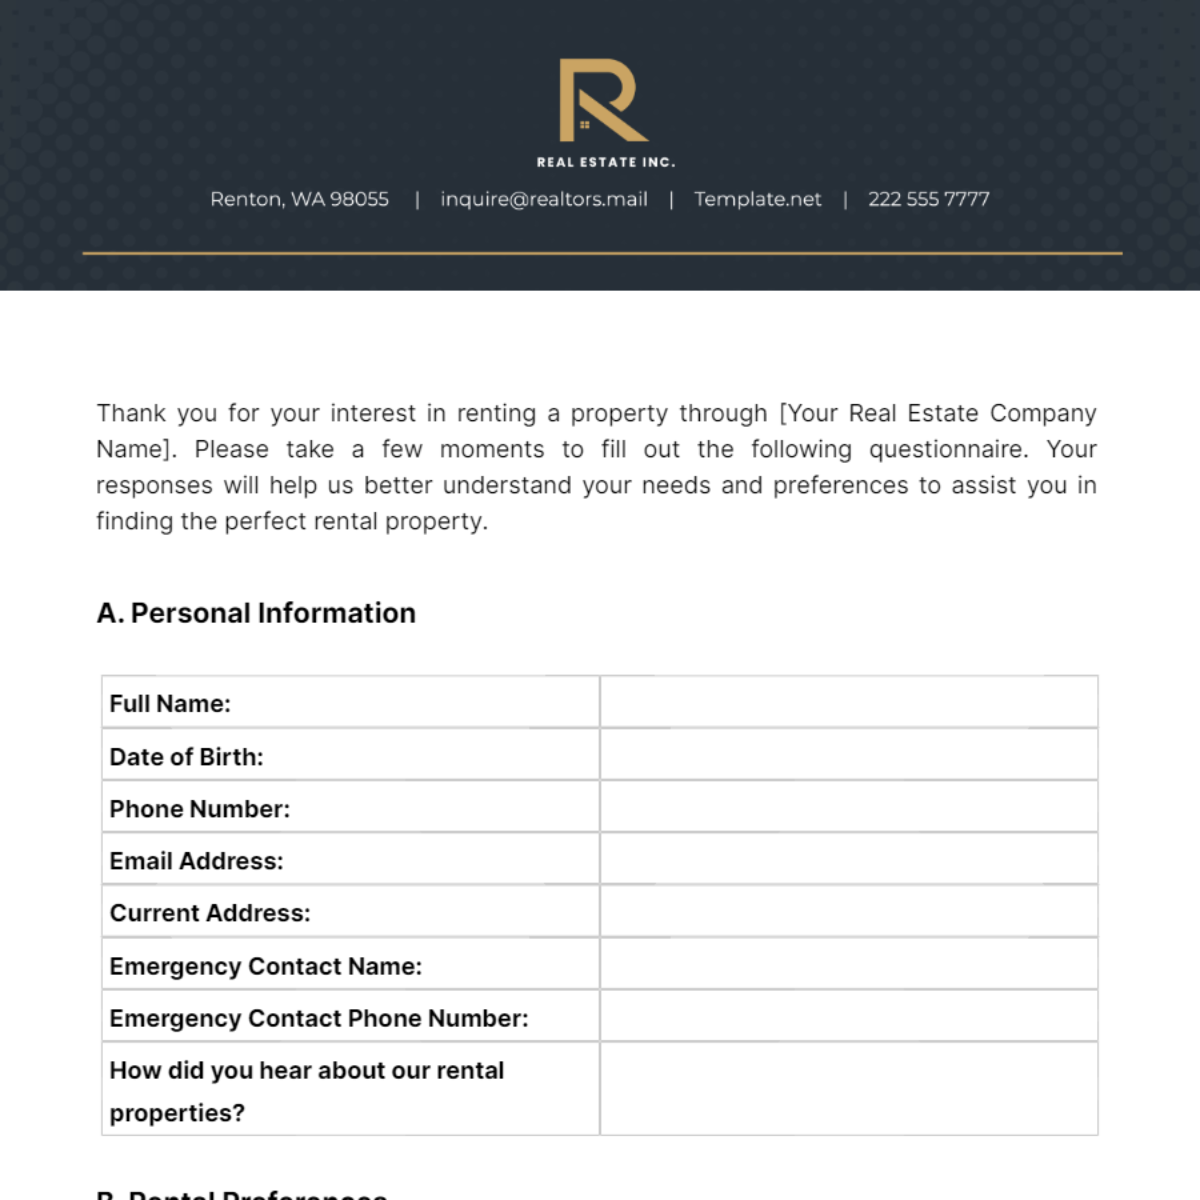 Real Estate Rental Questionnaire Template